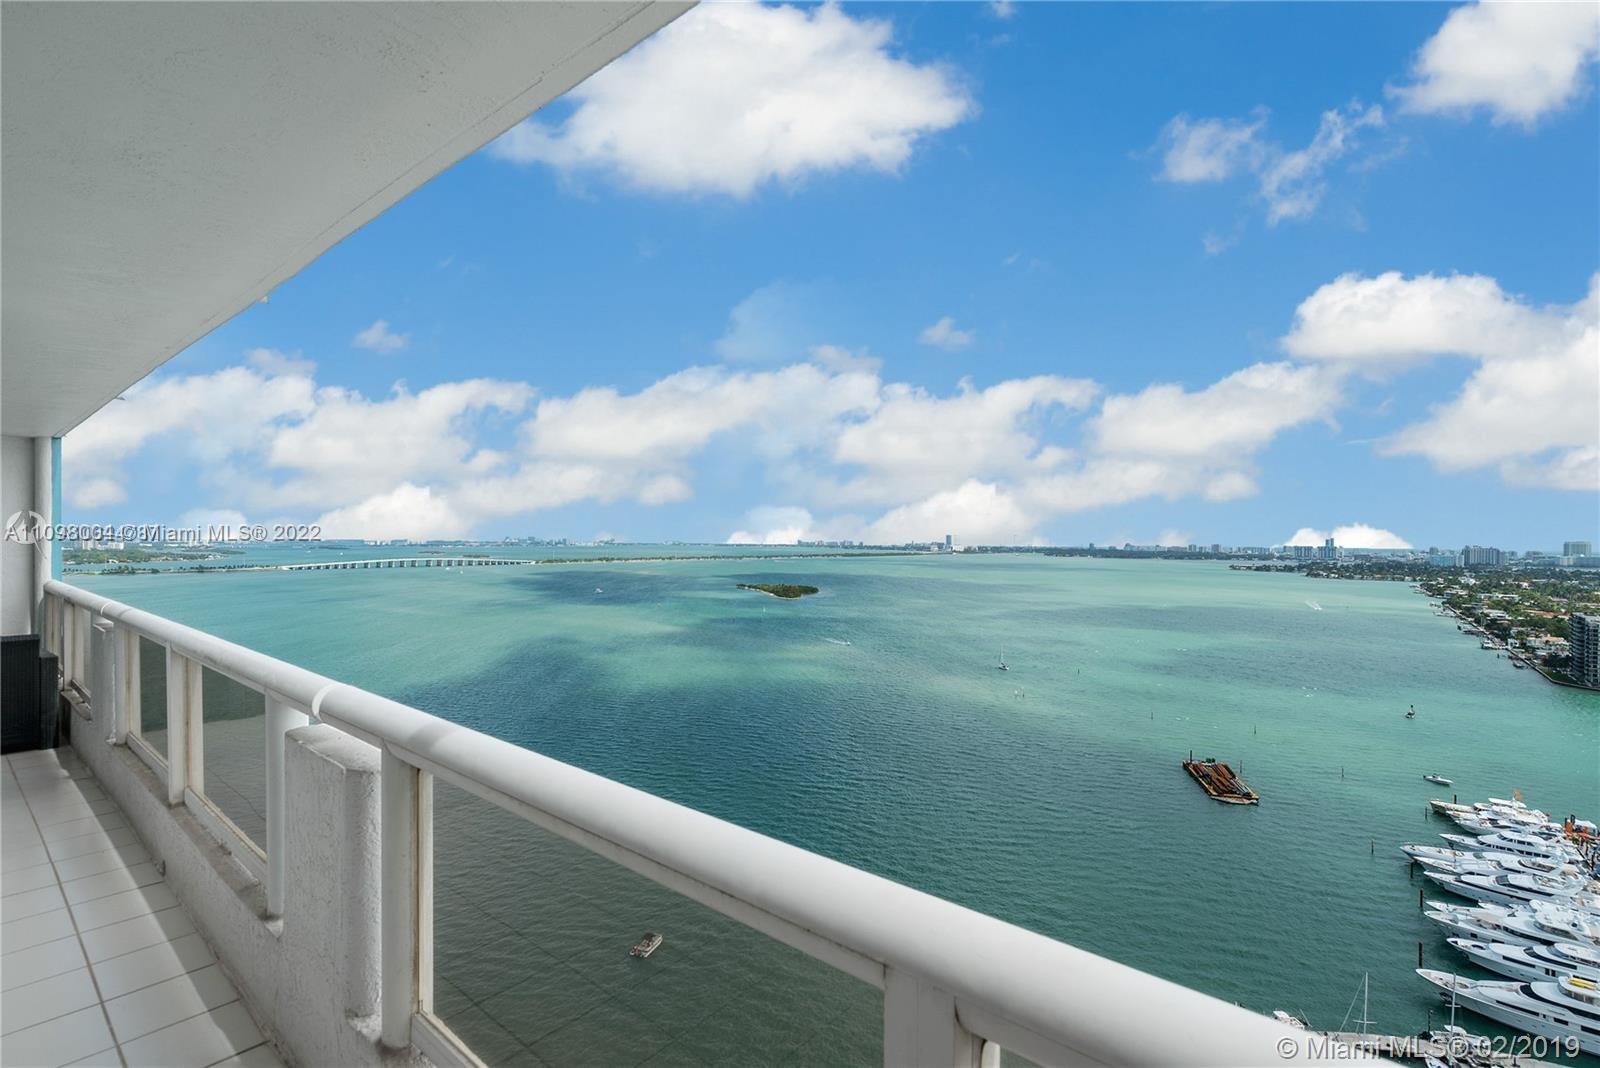 Beautiful furnished 2BR/2BA overlooking the bay. Enjoy unobstructed views of South Beach, the Port of Miami & its cruises and the breathtaking Biscayne Bay in this renovated unit at The Grand. Walking distance to many of Miami's best cultural and artistic venues like The Performing Art Center, sports Arena and Bayfront Park. Minutes away from Midtown, Design District and Brickell. The Grand offers great amenities like bars and restaurants, fully equipped gym, sauna, convenience store, pharmacy, heated pool and 24 hours concierge and security.